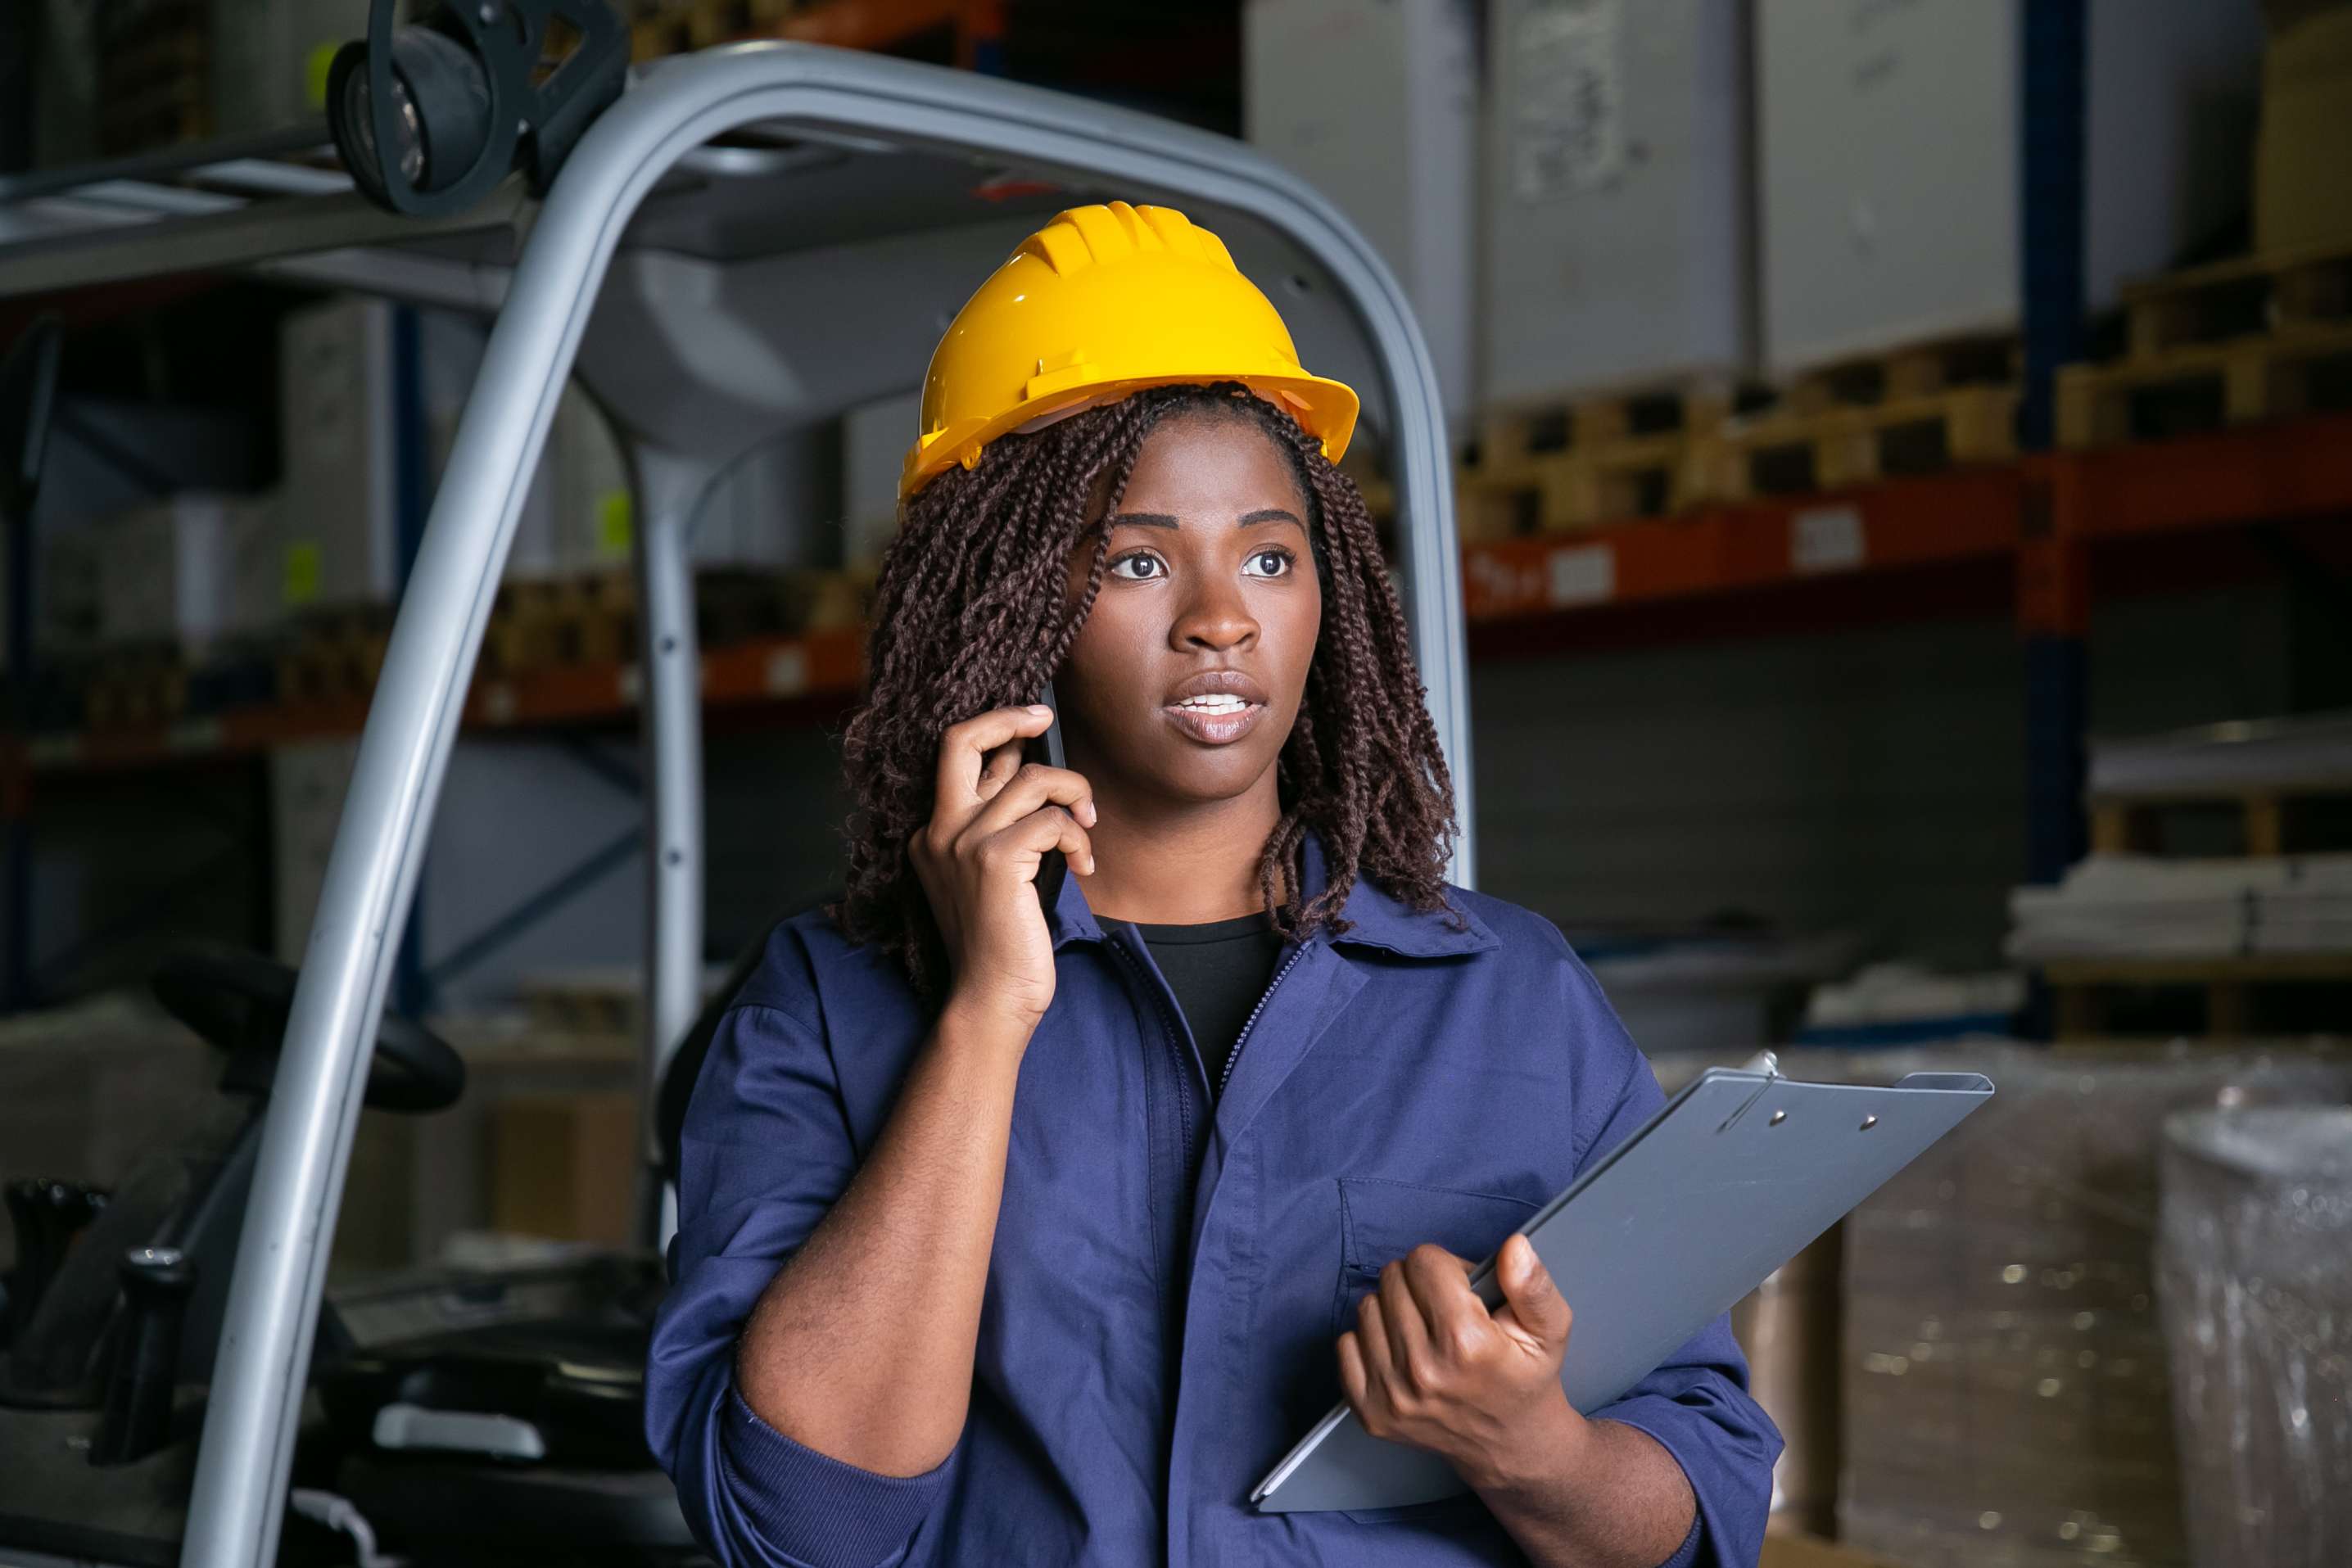 focused-black-warehouse-worker-yellow-hardhat-standing-near-forklift-talking-cell-shelves-with-goods-background-medium-shot-labor-communication-concept (1)